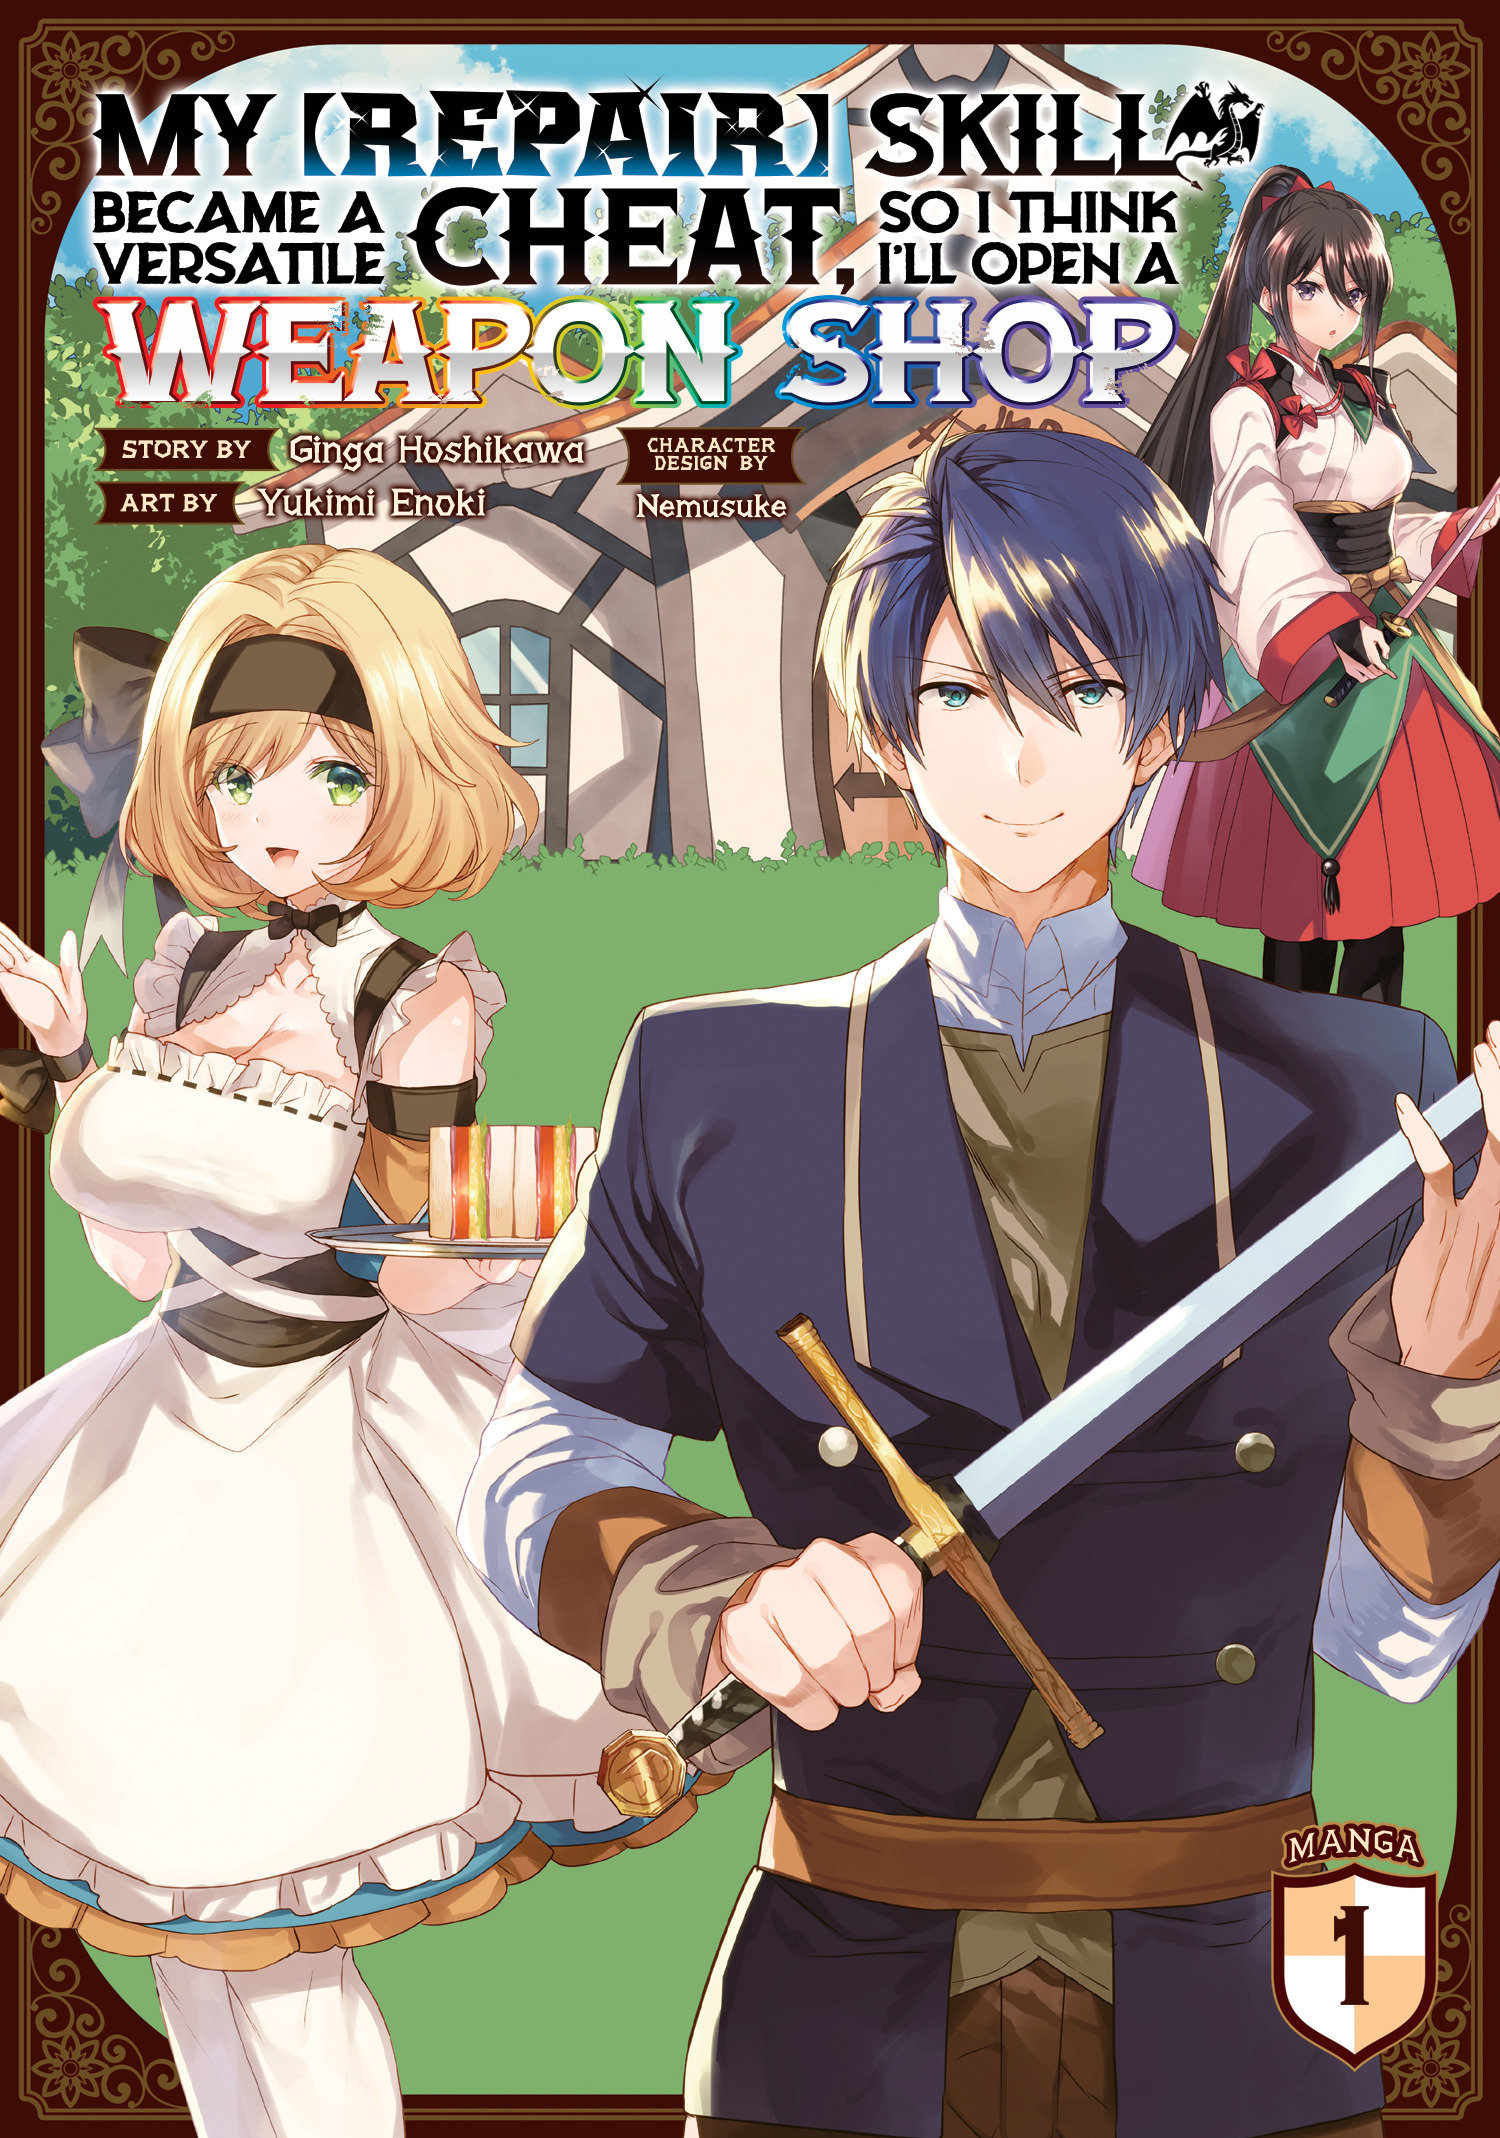 Since My Repair Skill Became a Versatile Cheat, I Think I'll Open a Weapon Shop Manga Volume 1